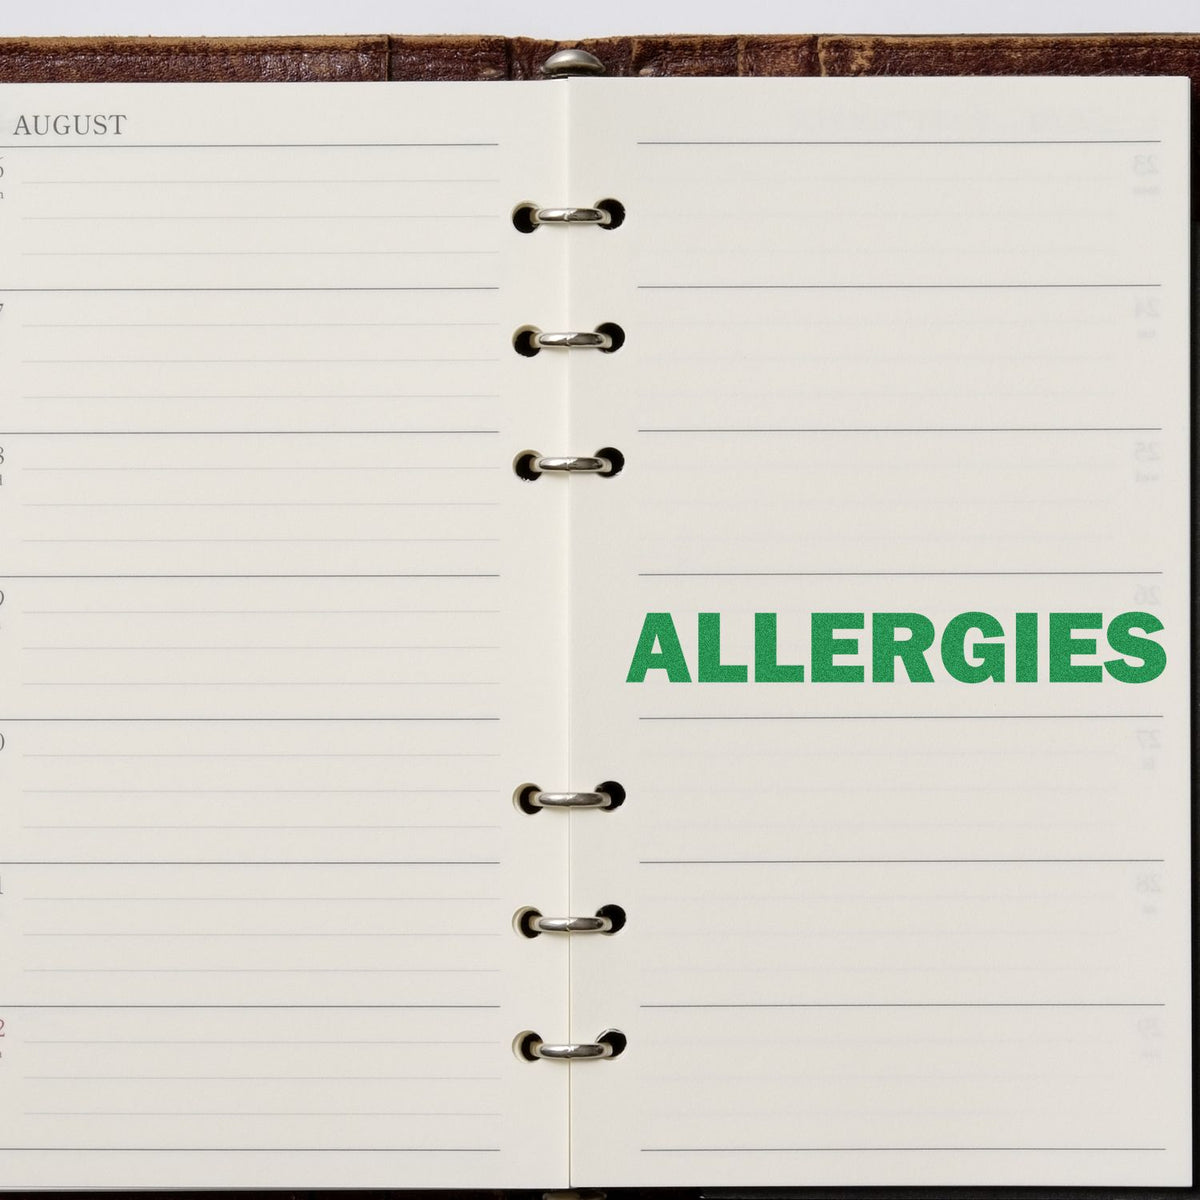 Bold Allergies Rubber Stamp In Use